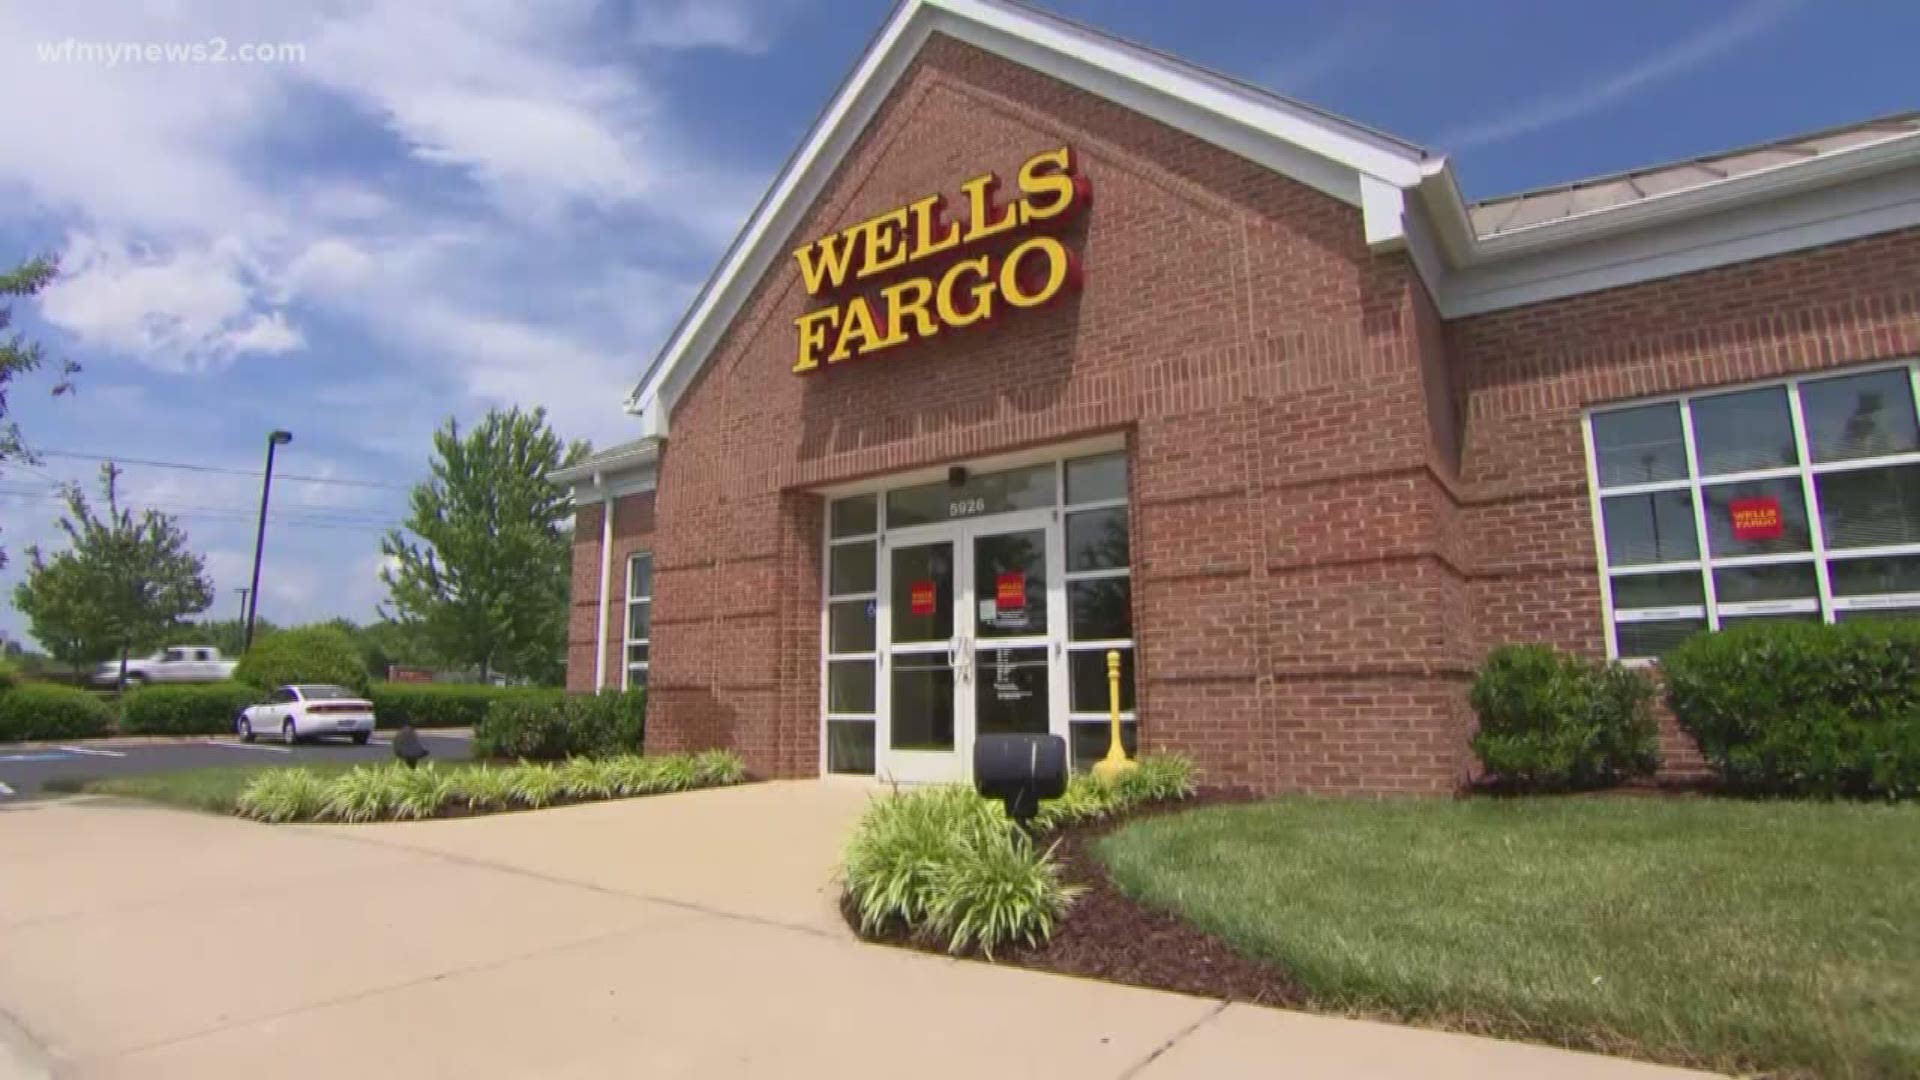 What Wells Fargo Fine Means For You